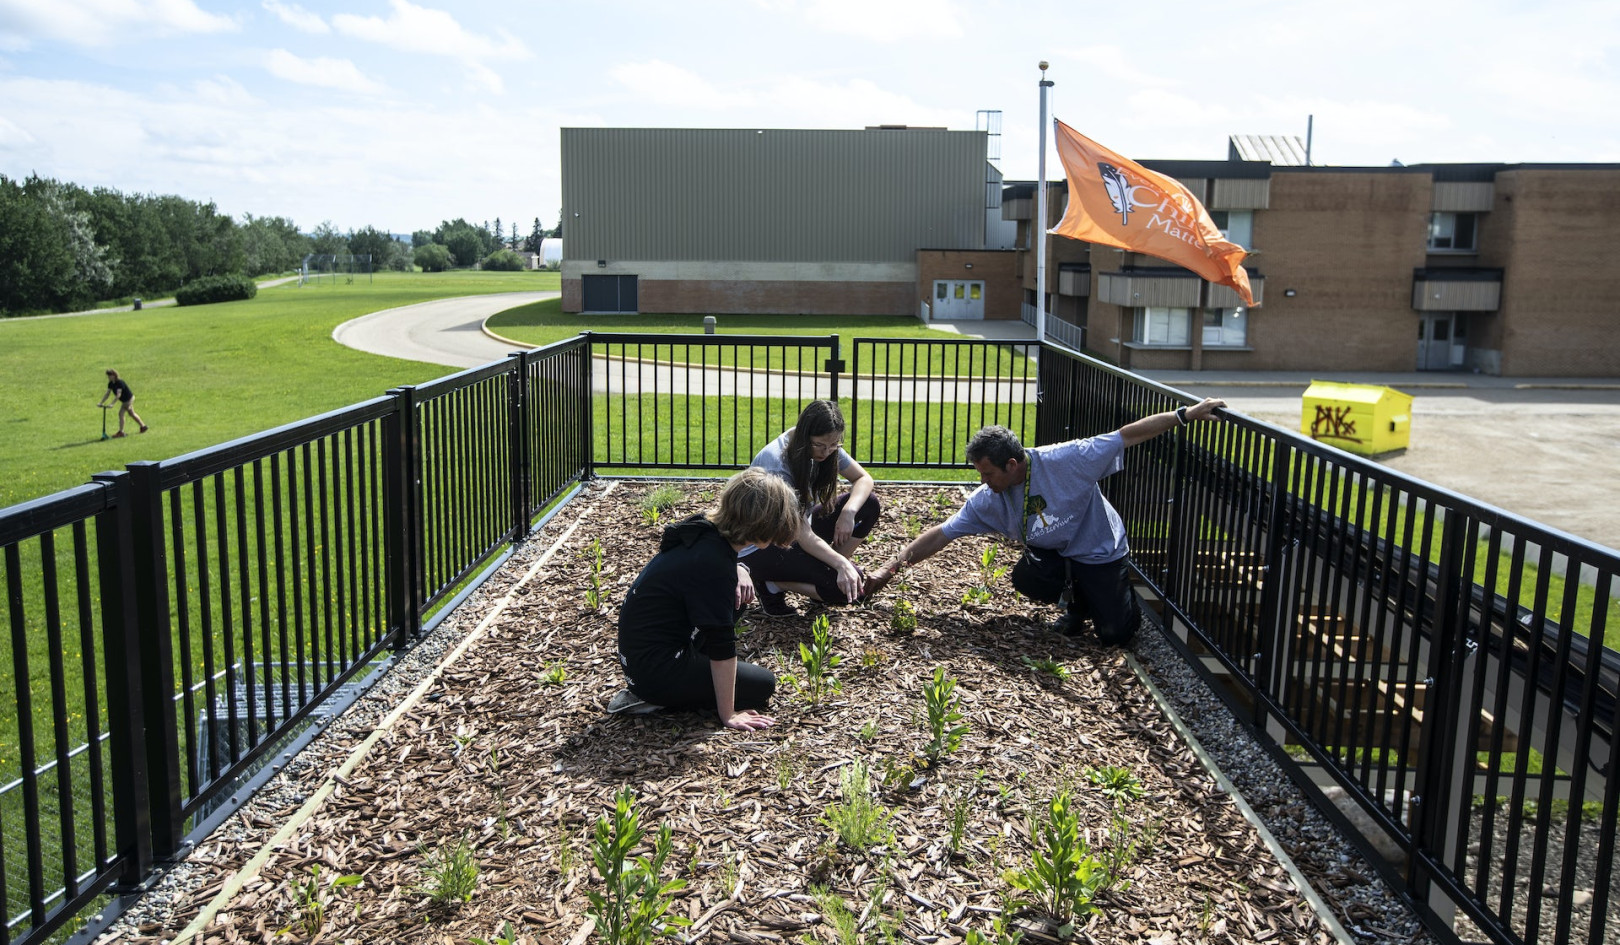 How Schools And Families Can Take Climate Action By Learning About Food Systems